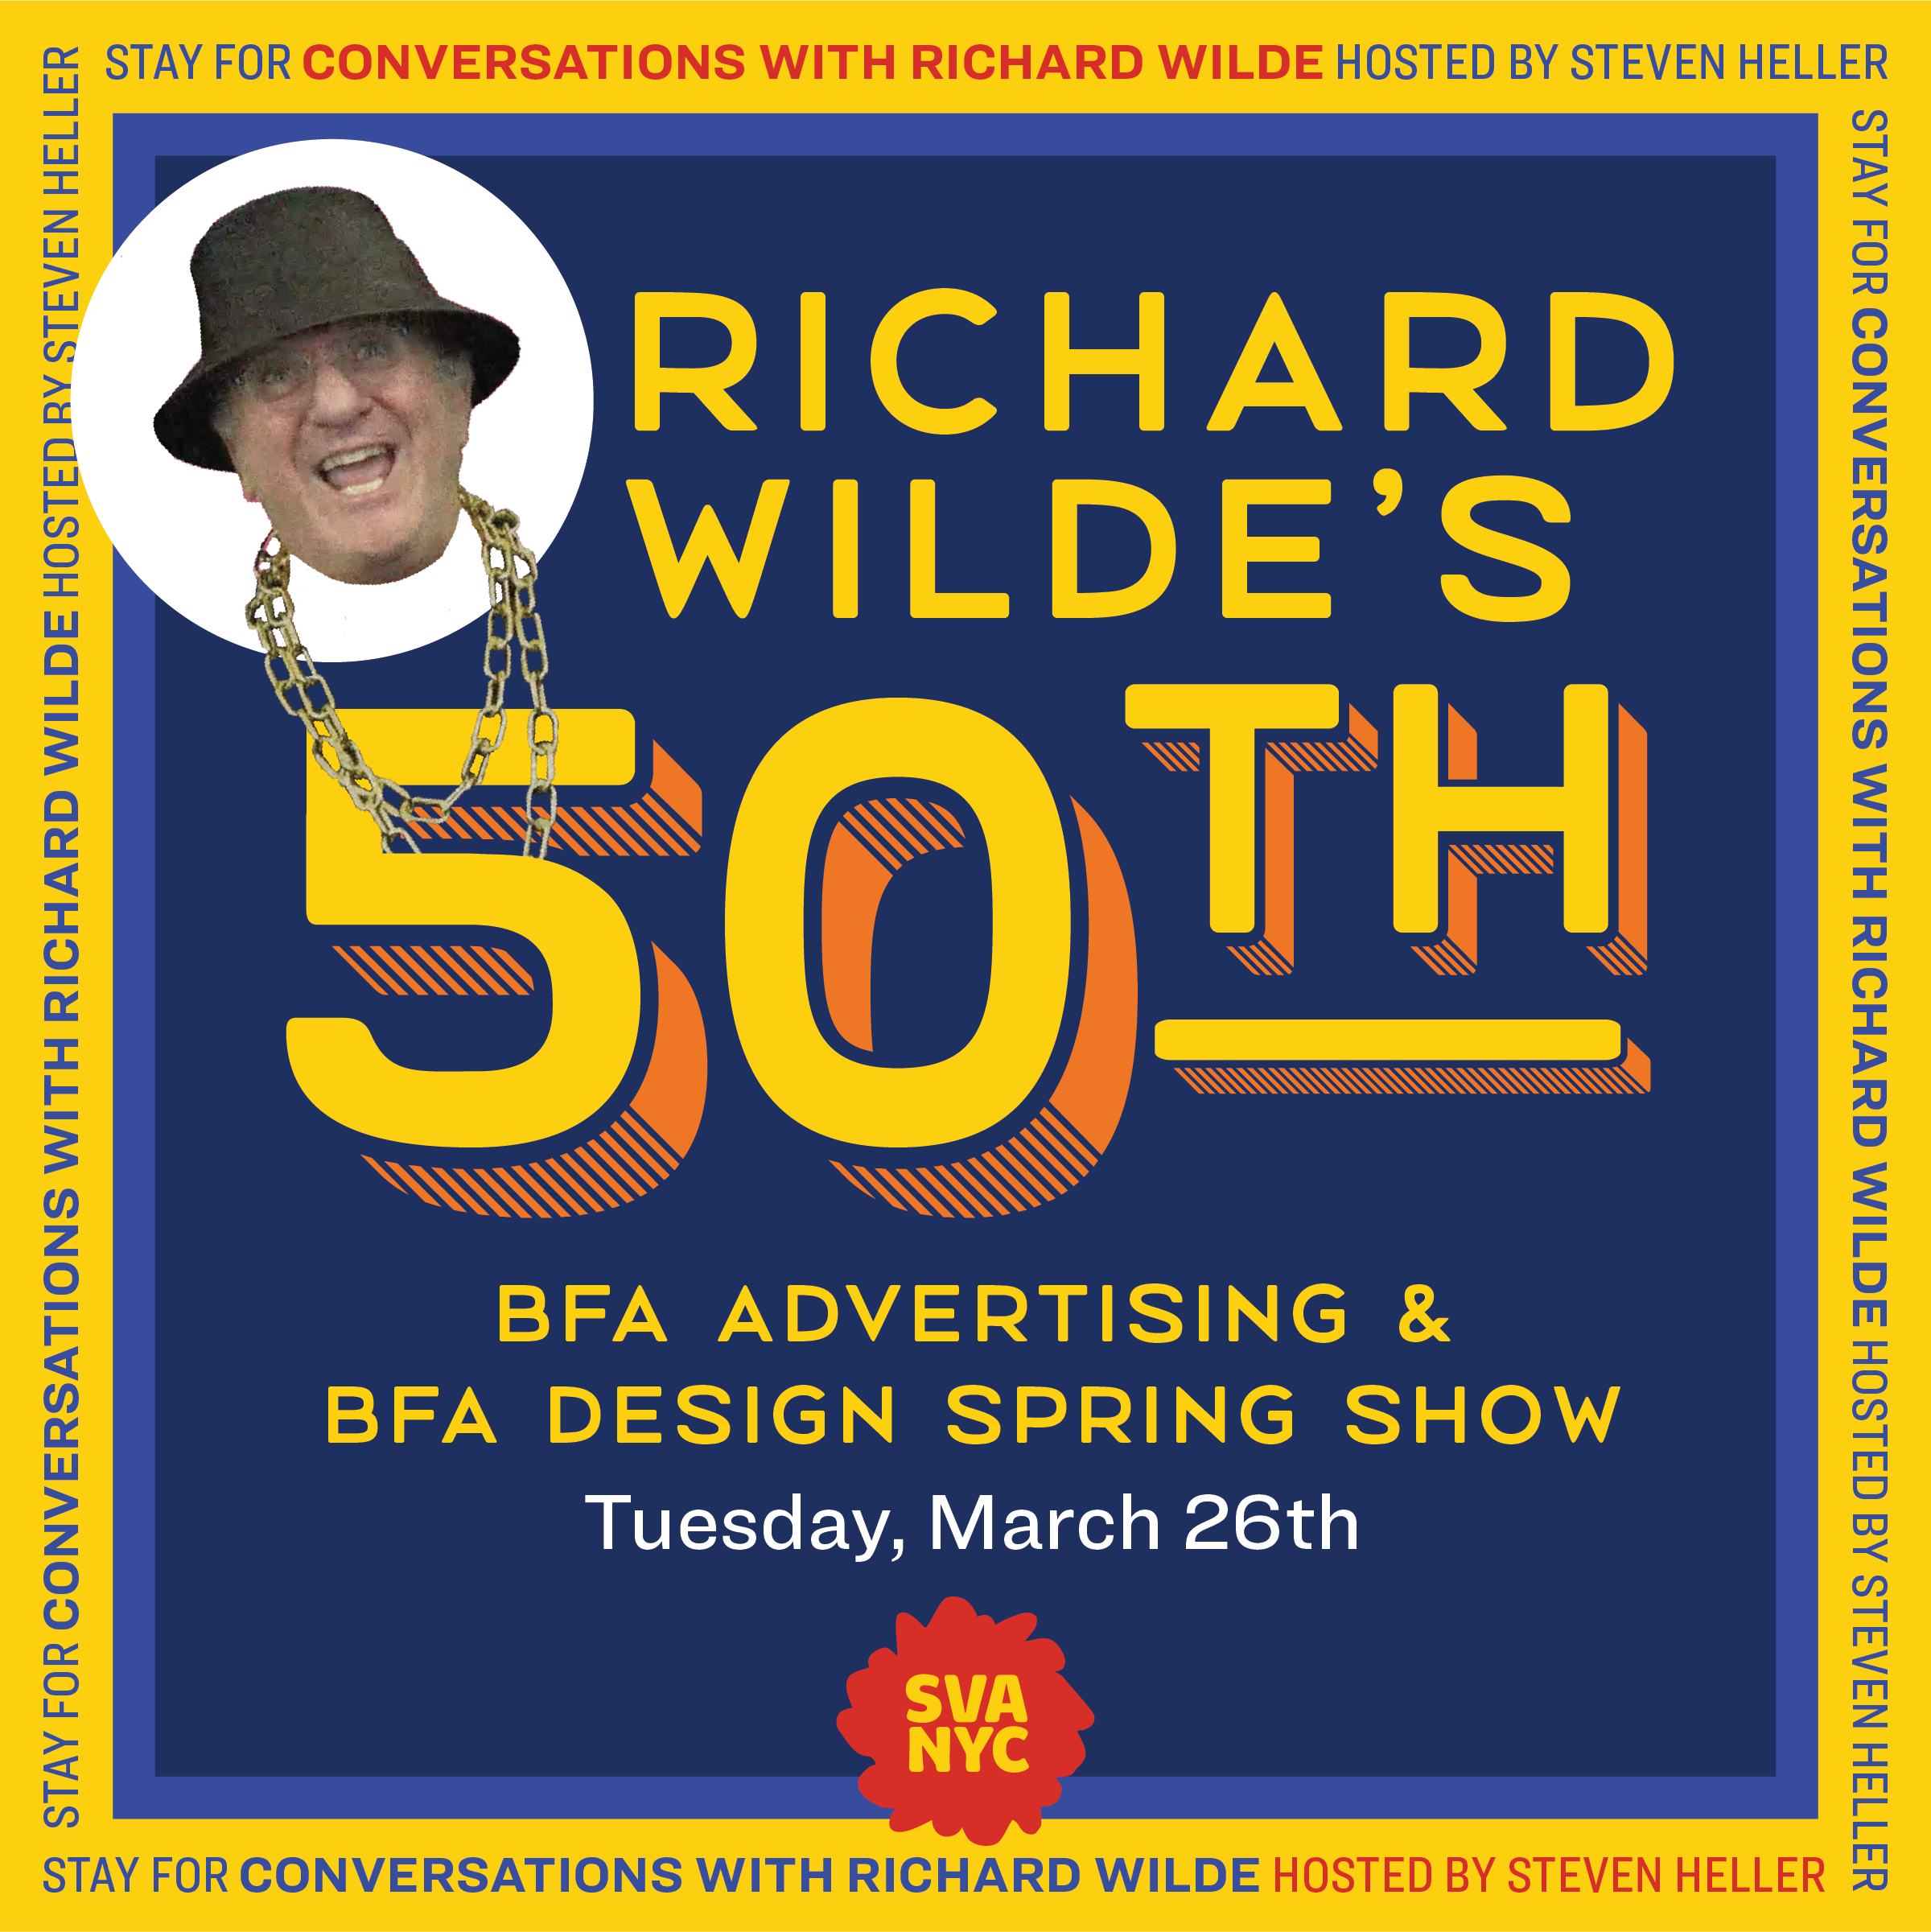 <p "="">A graphic promoting BFA Advertising and BFA Design's spring exhibition, with a photo of Richard Wilde wearing a bucket hat and chain-link necklace.
